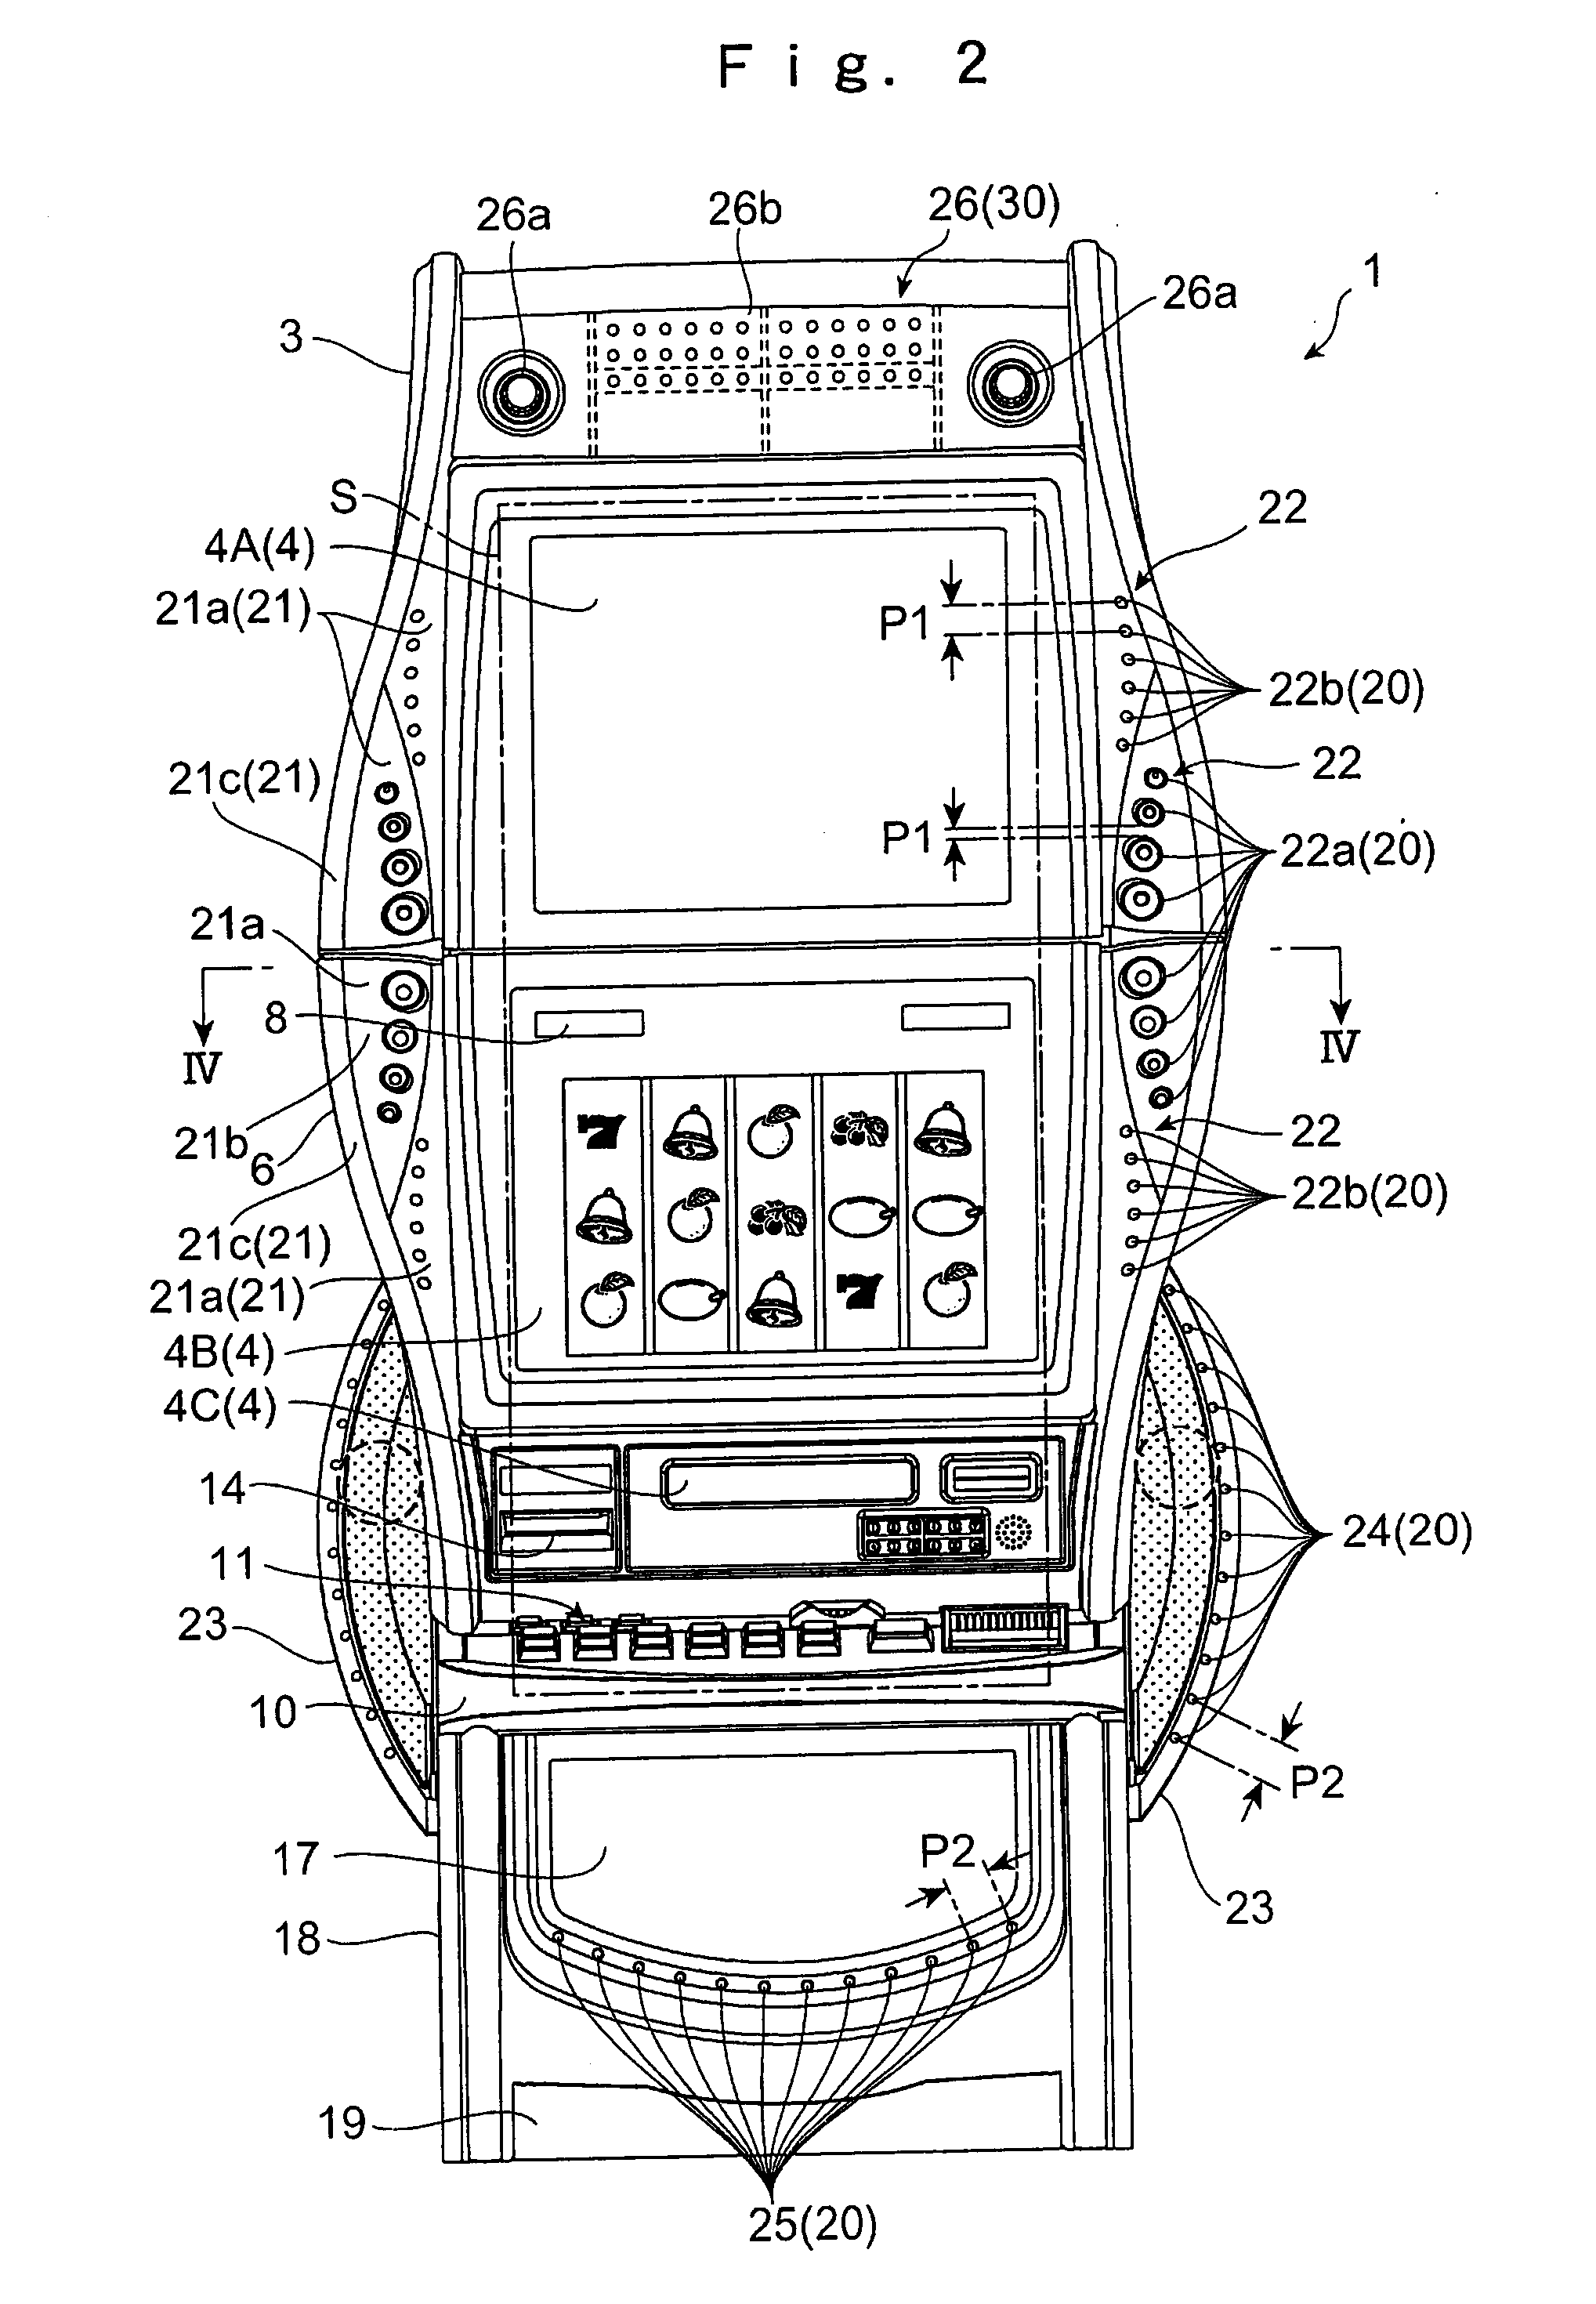 Gaming device